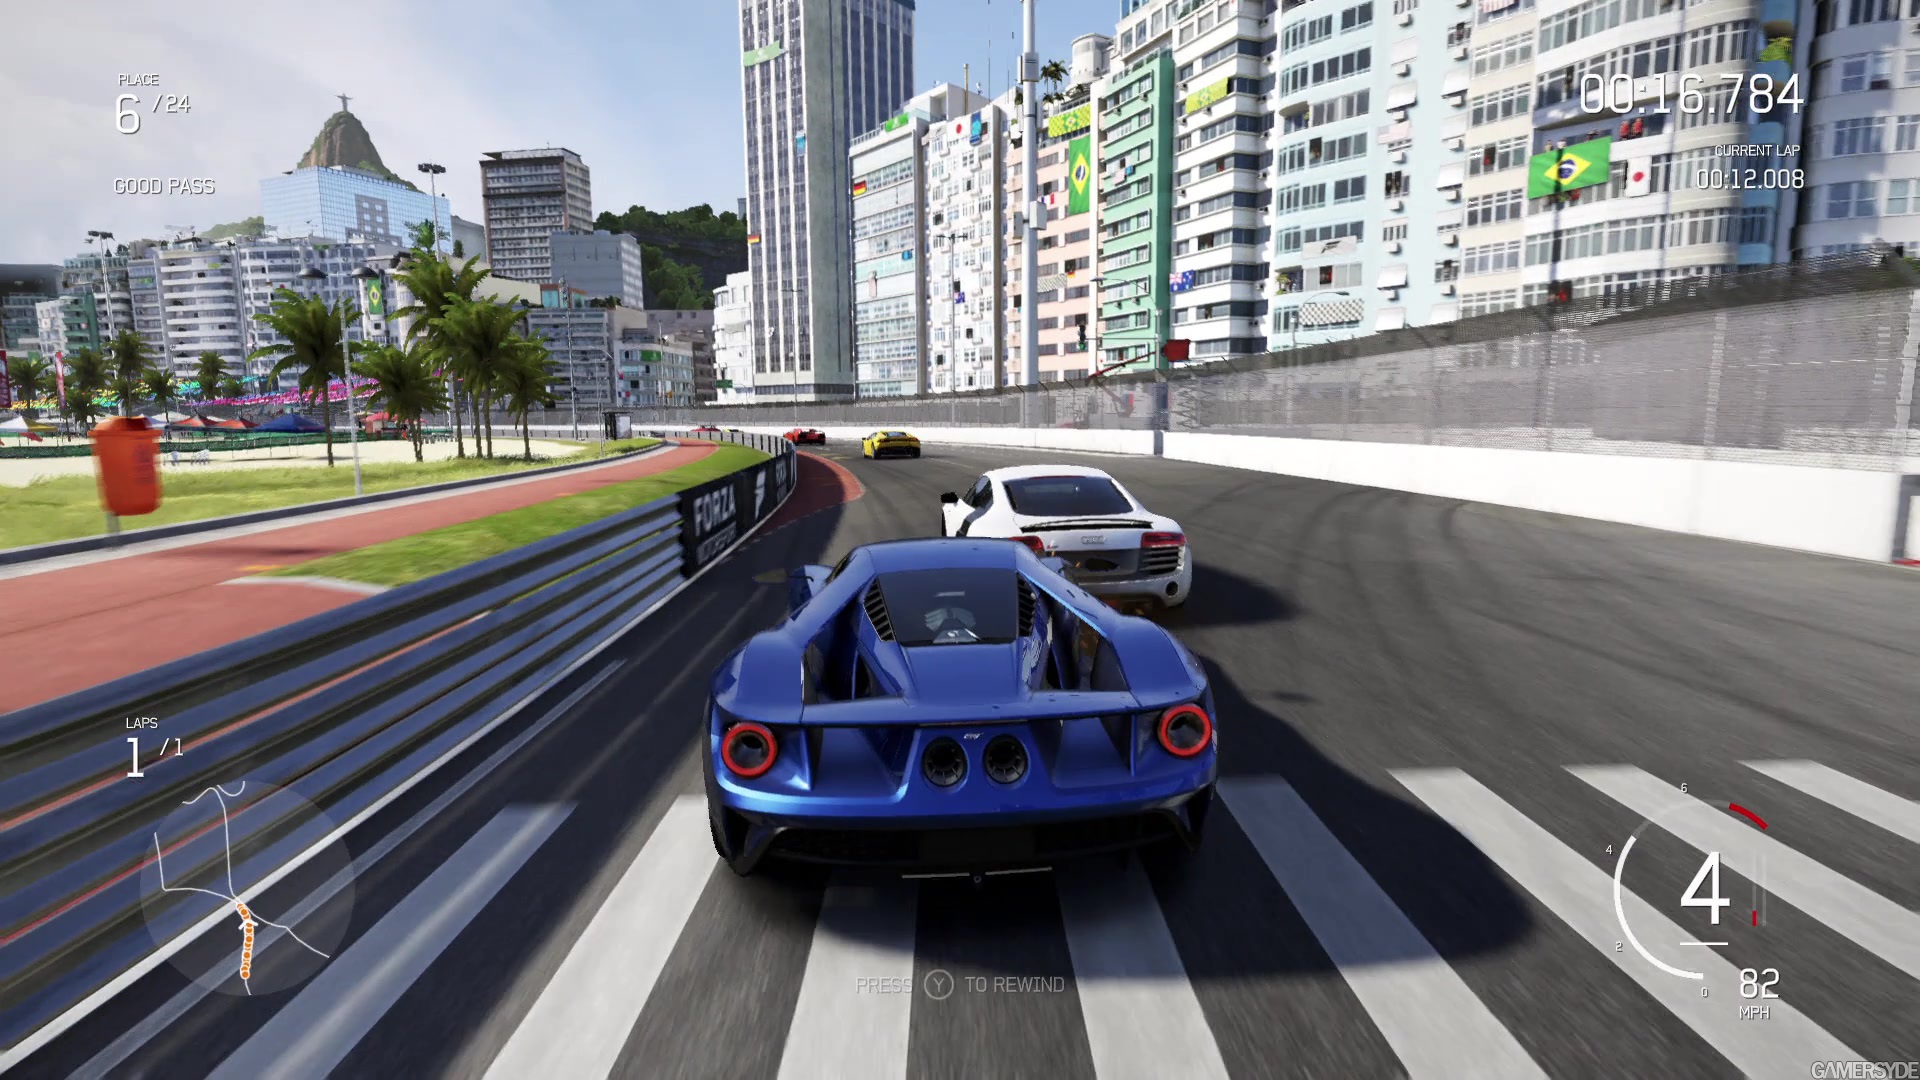 Forza Motorsport 5: Direct Feed Gameplay